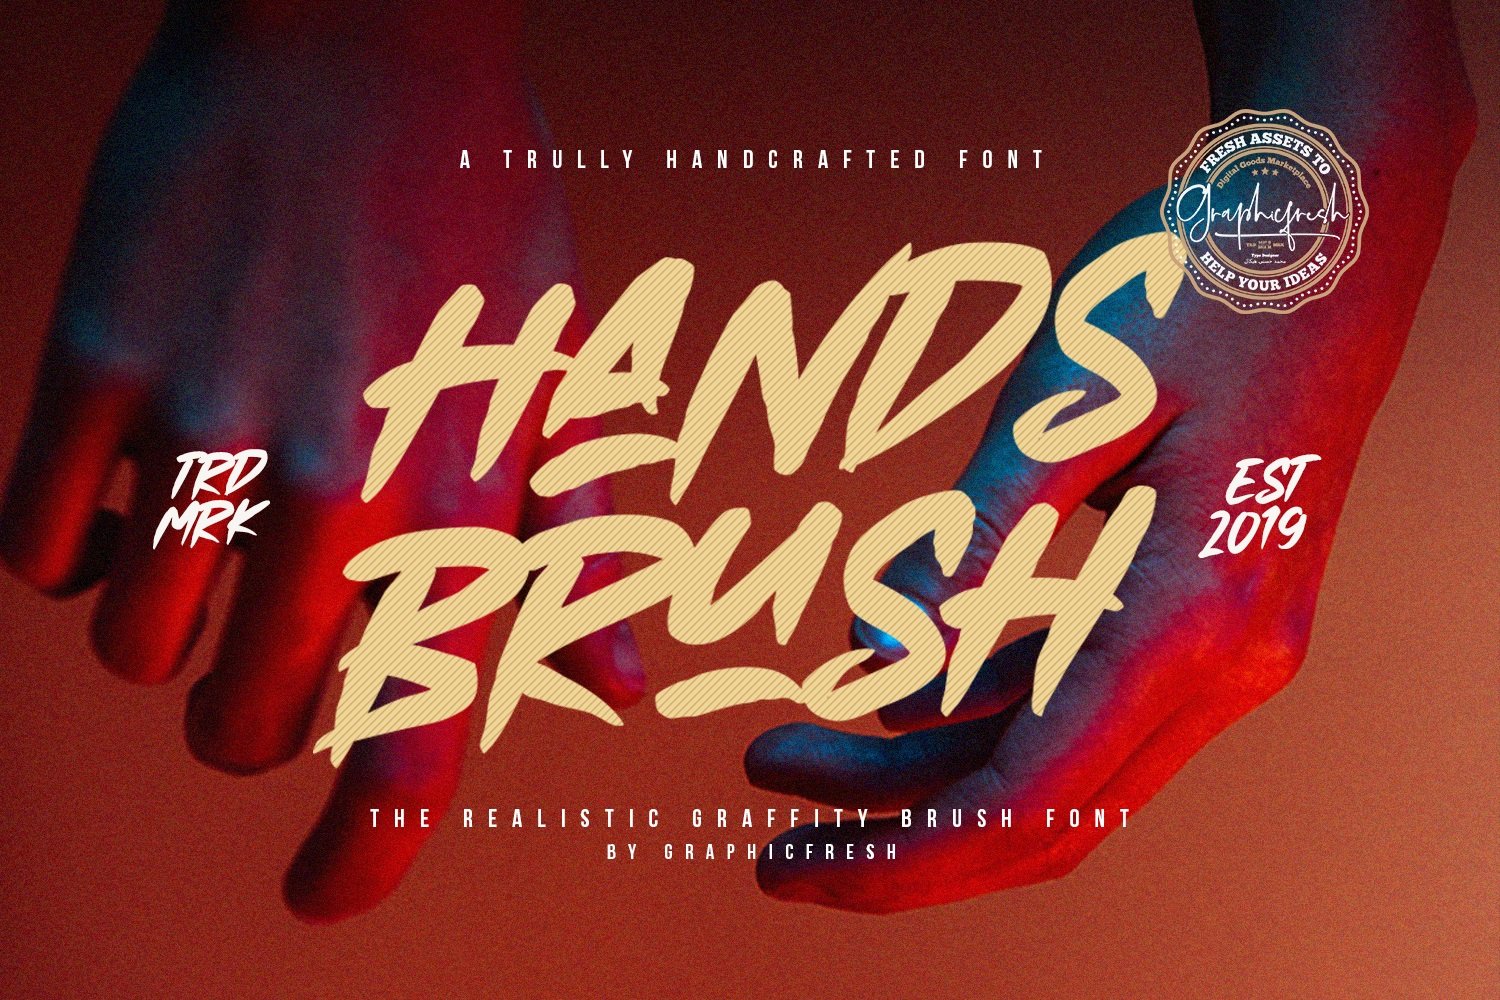 Hands Brush - Strong Urban Brush cover image.